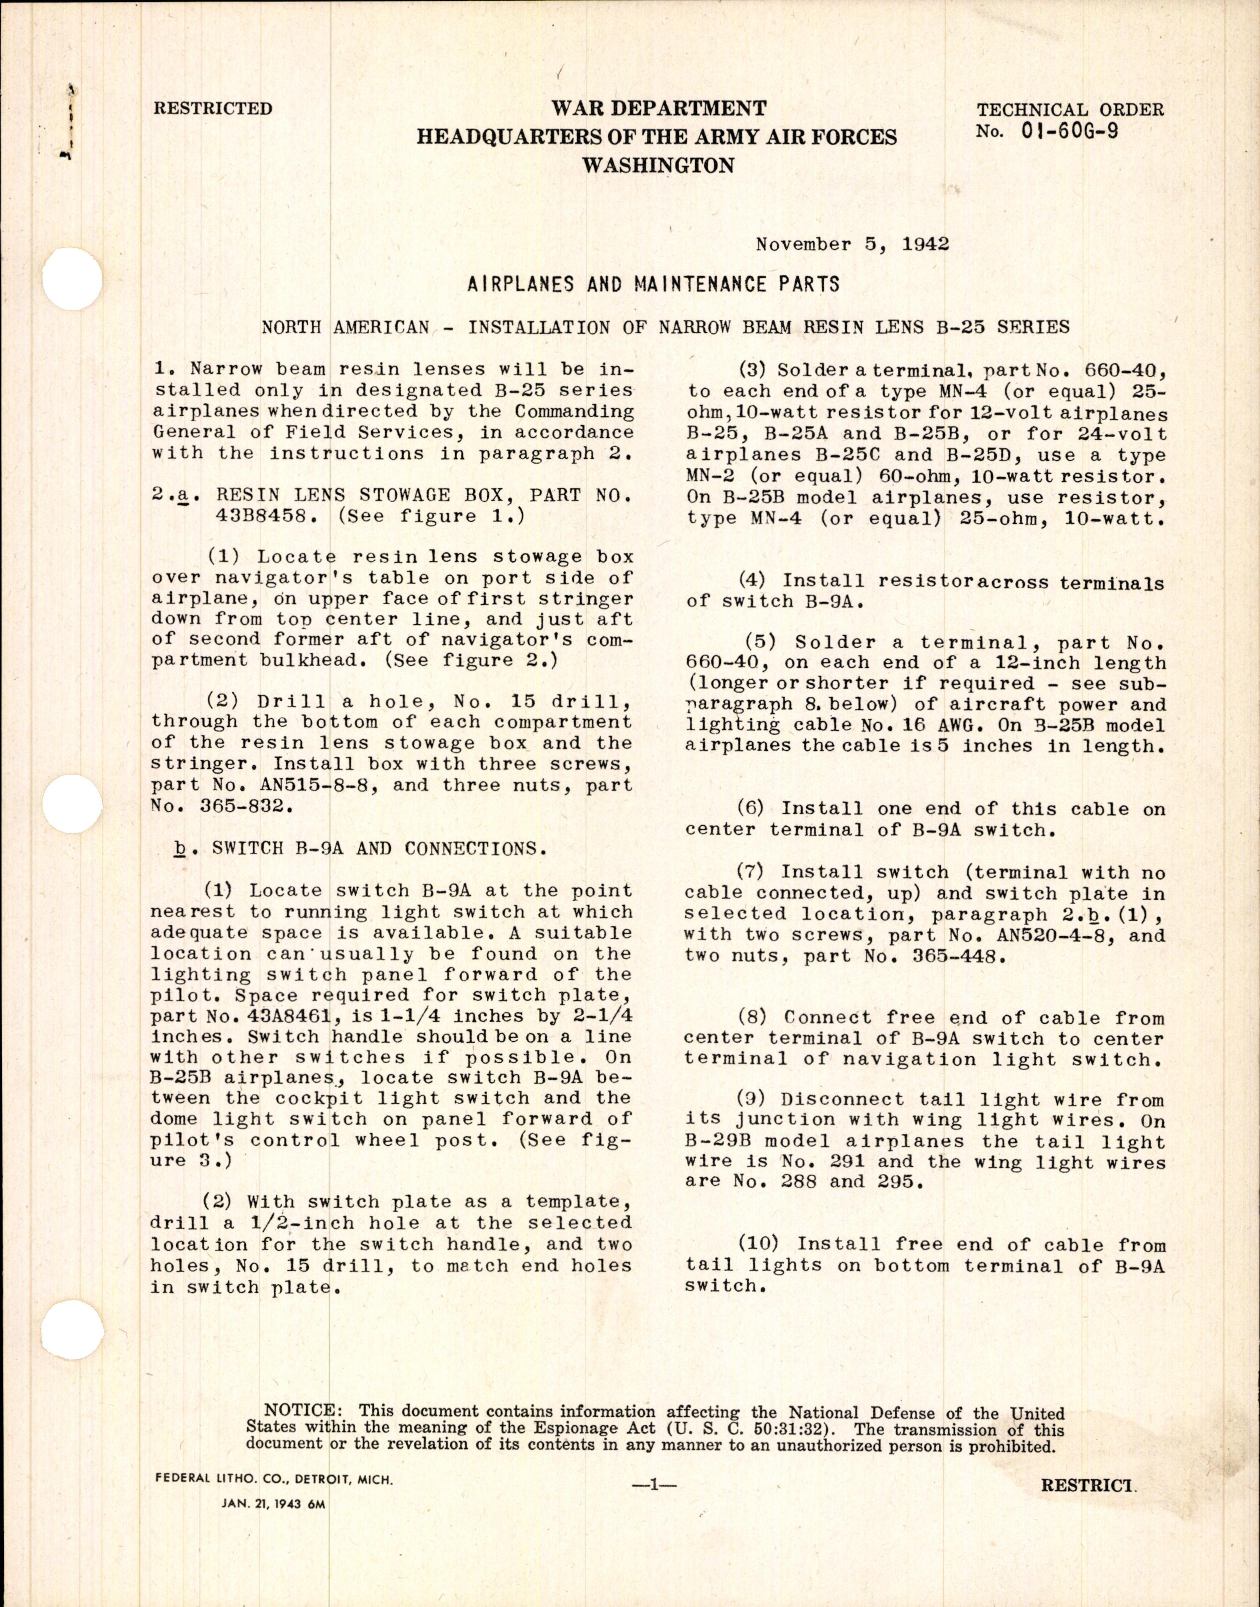 Sample page 1 from AirCorps Library document: Installation of Narrow Beam Resin Lens for B-25 Series